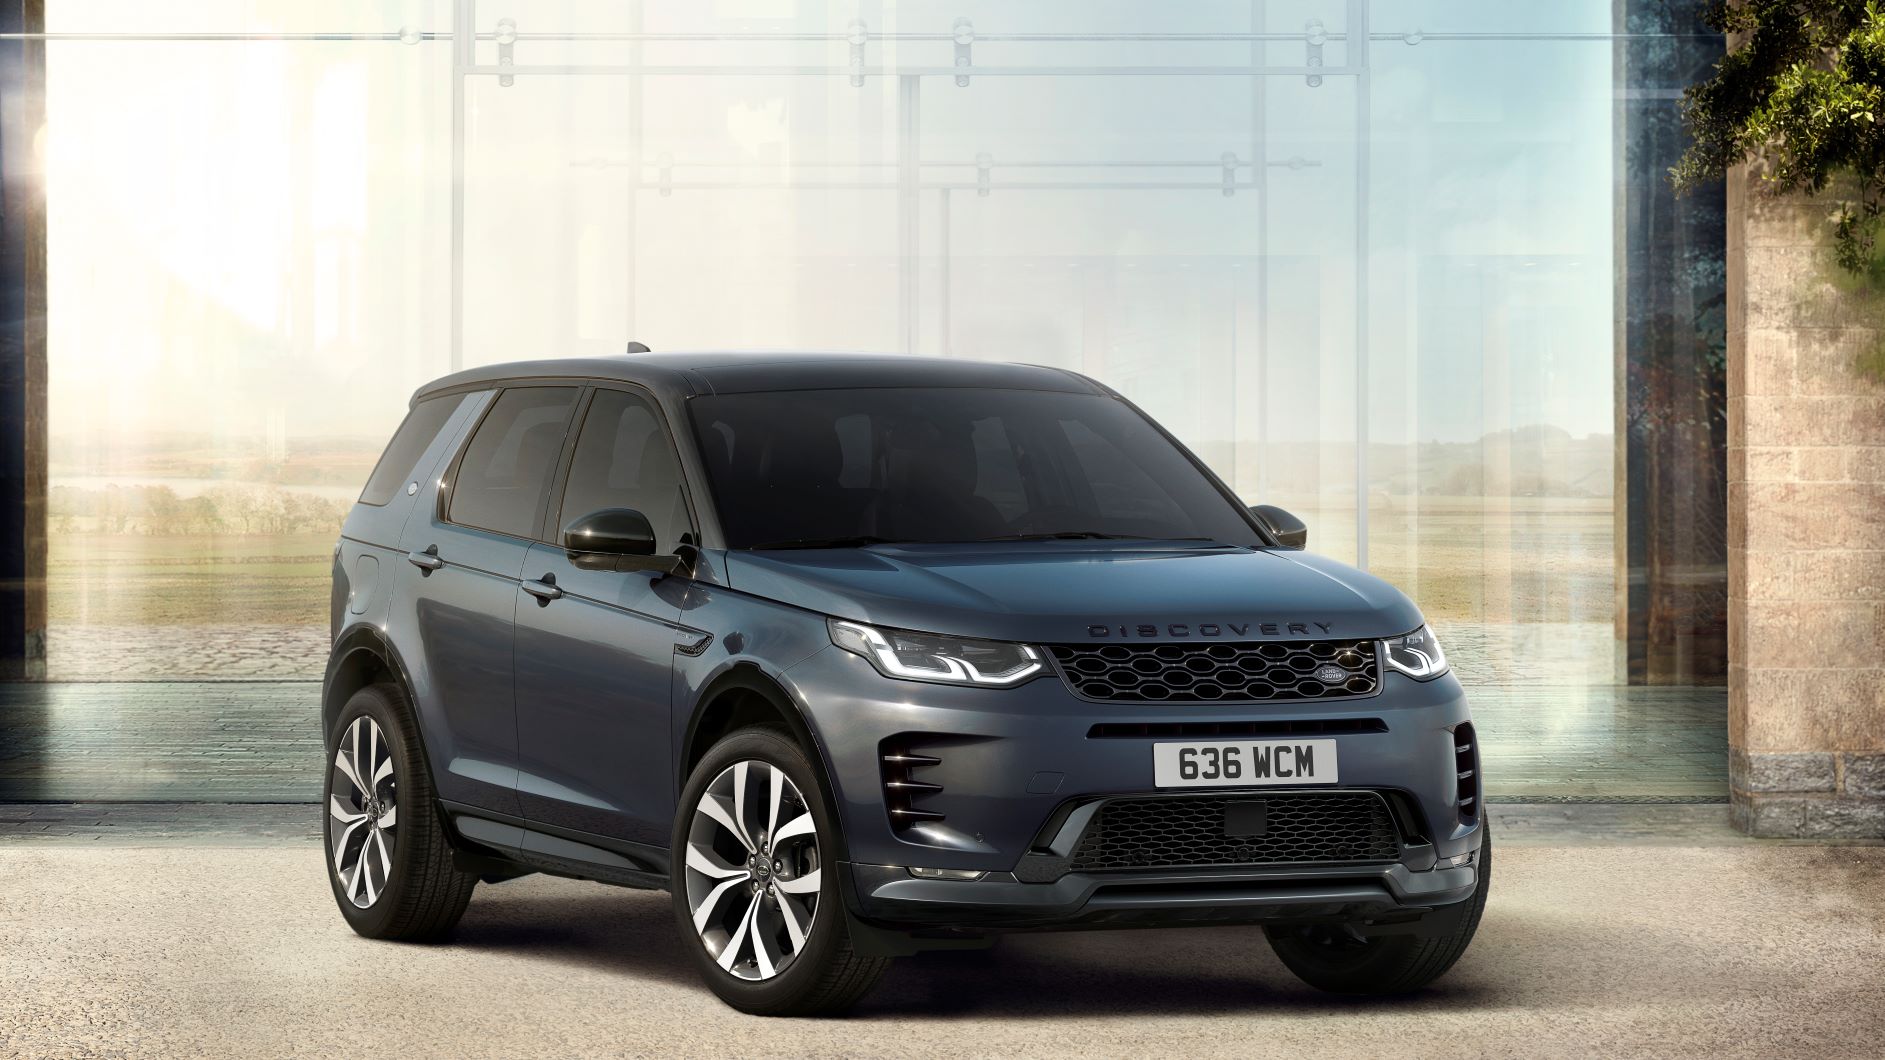 2017 Land Rover Discovery Sport Updates Announced, Priced From $38,690